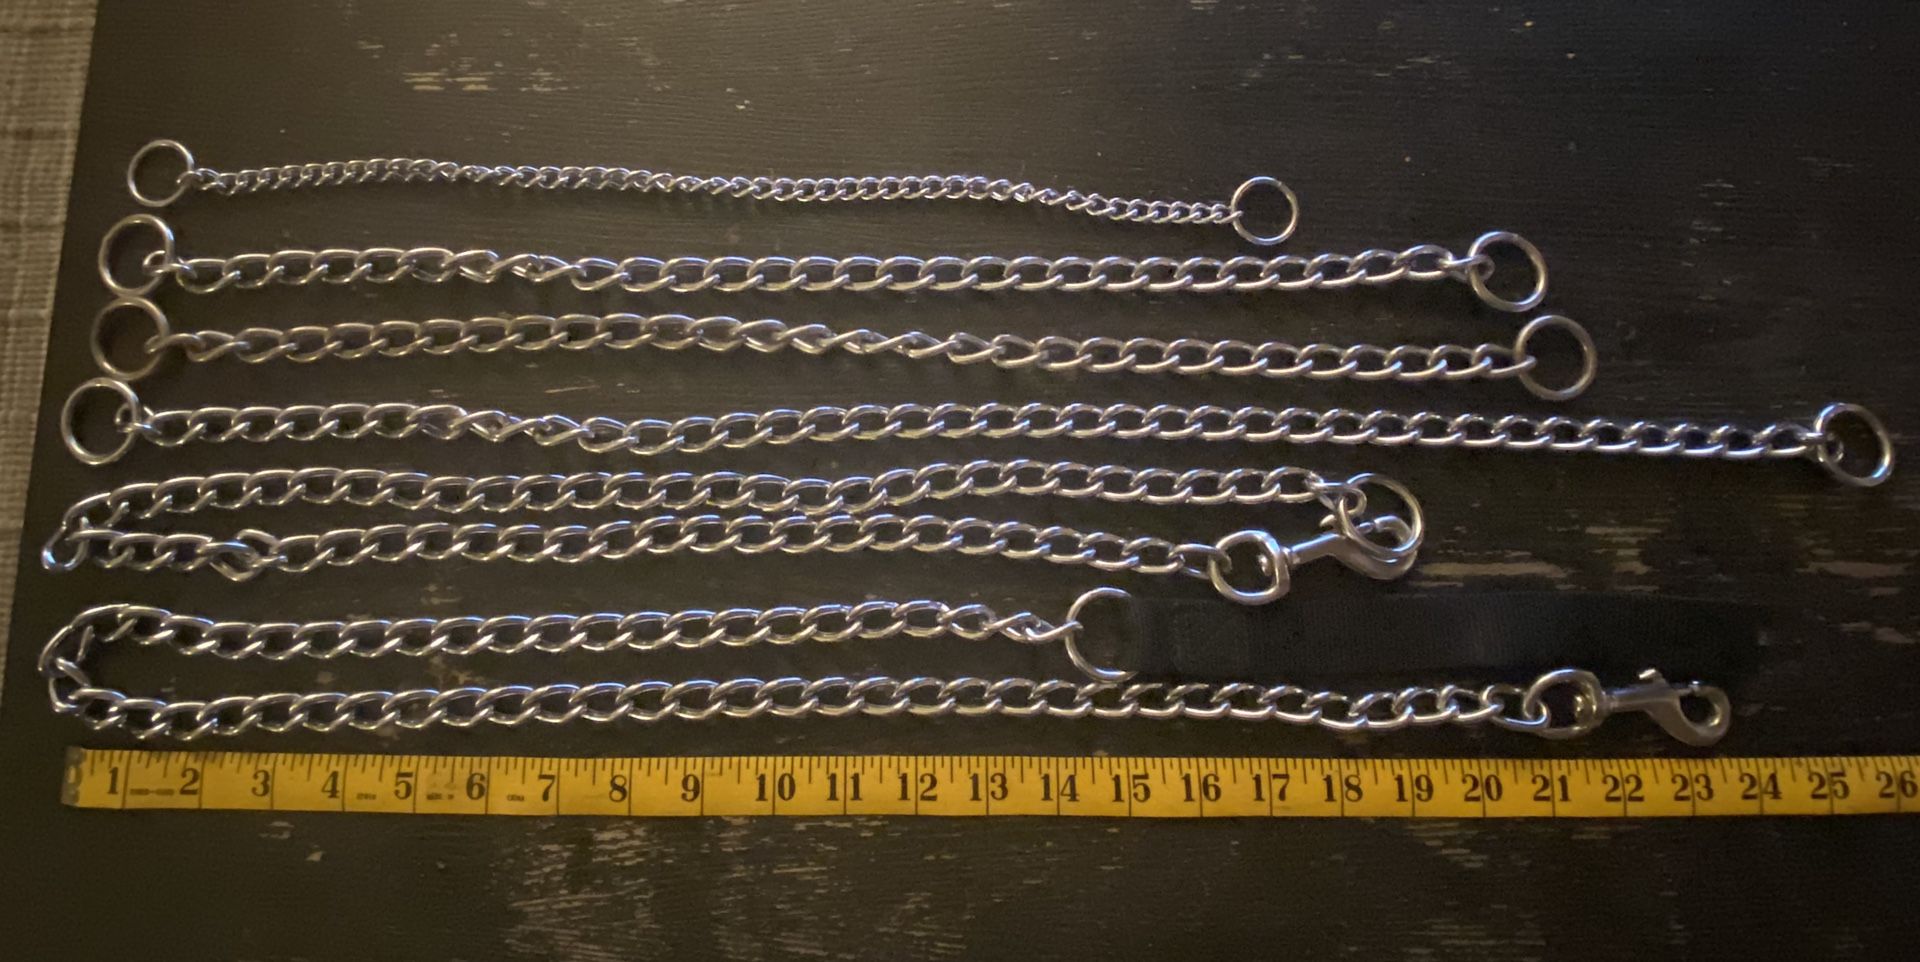 Metal dog leash and collar chains various sizes